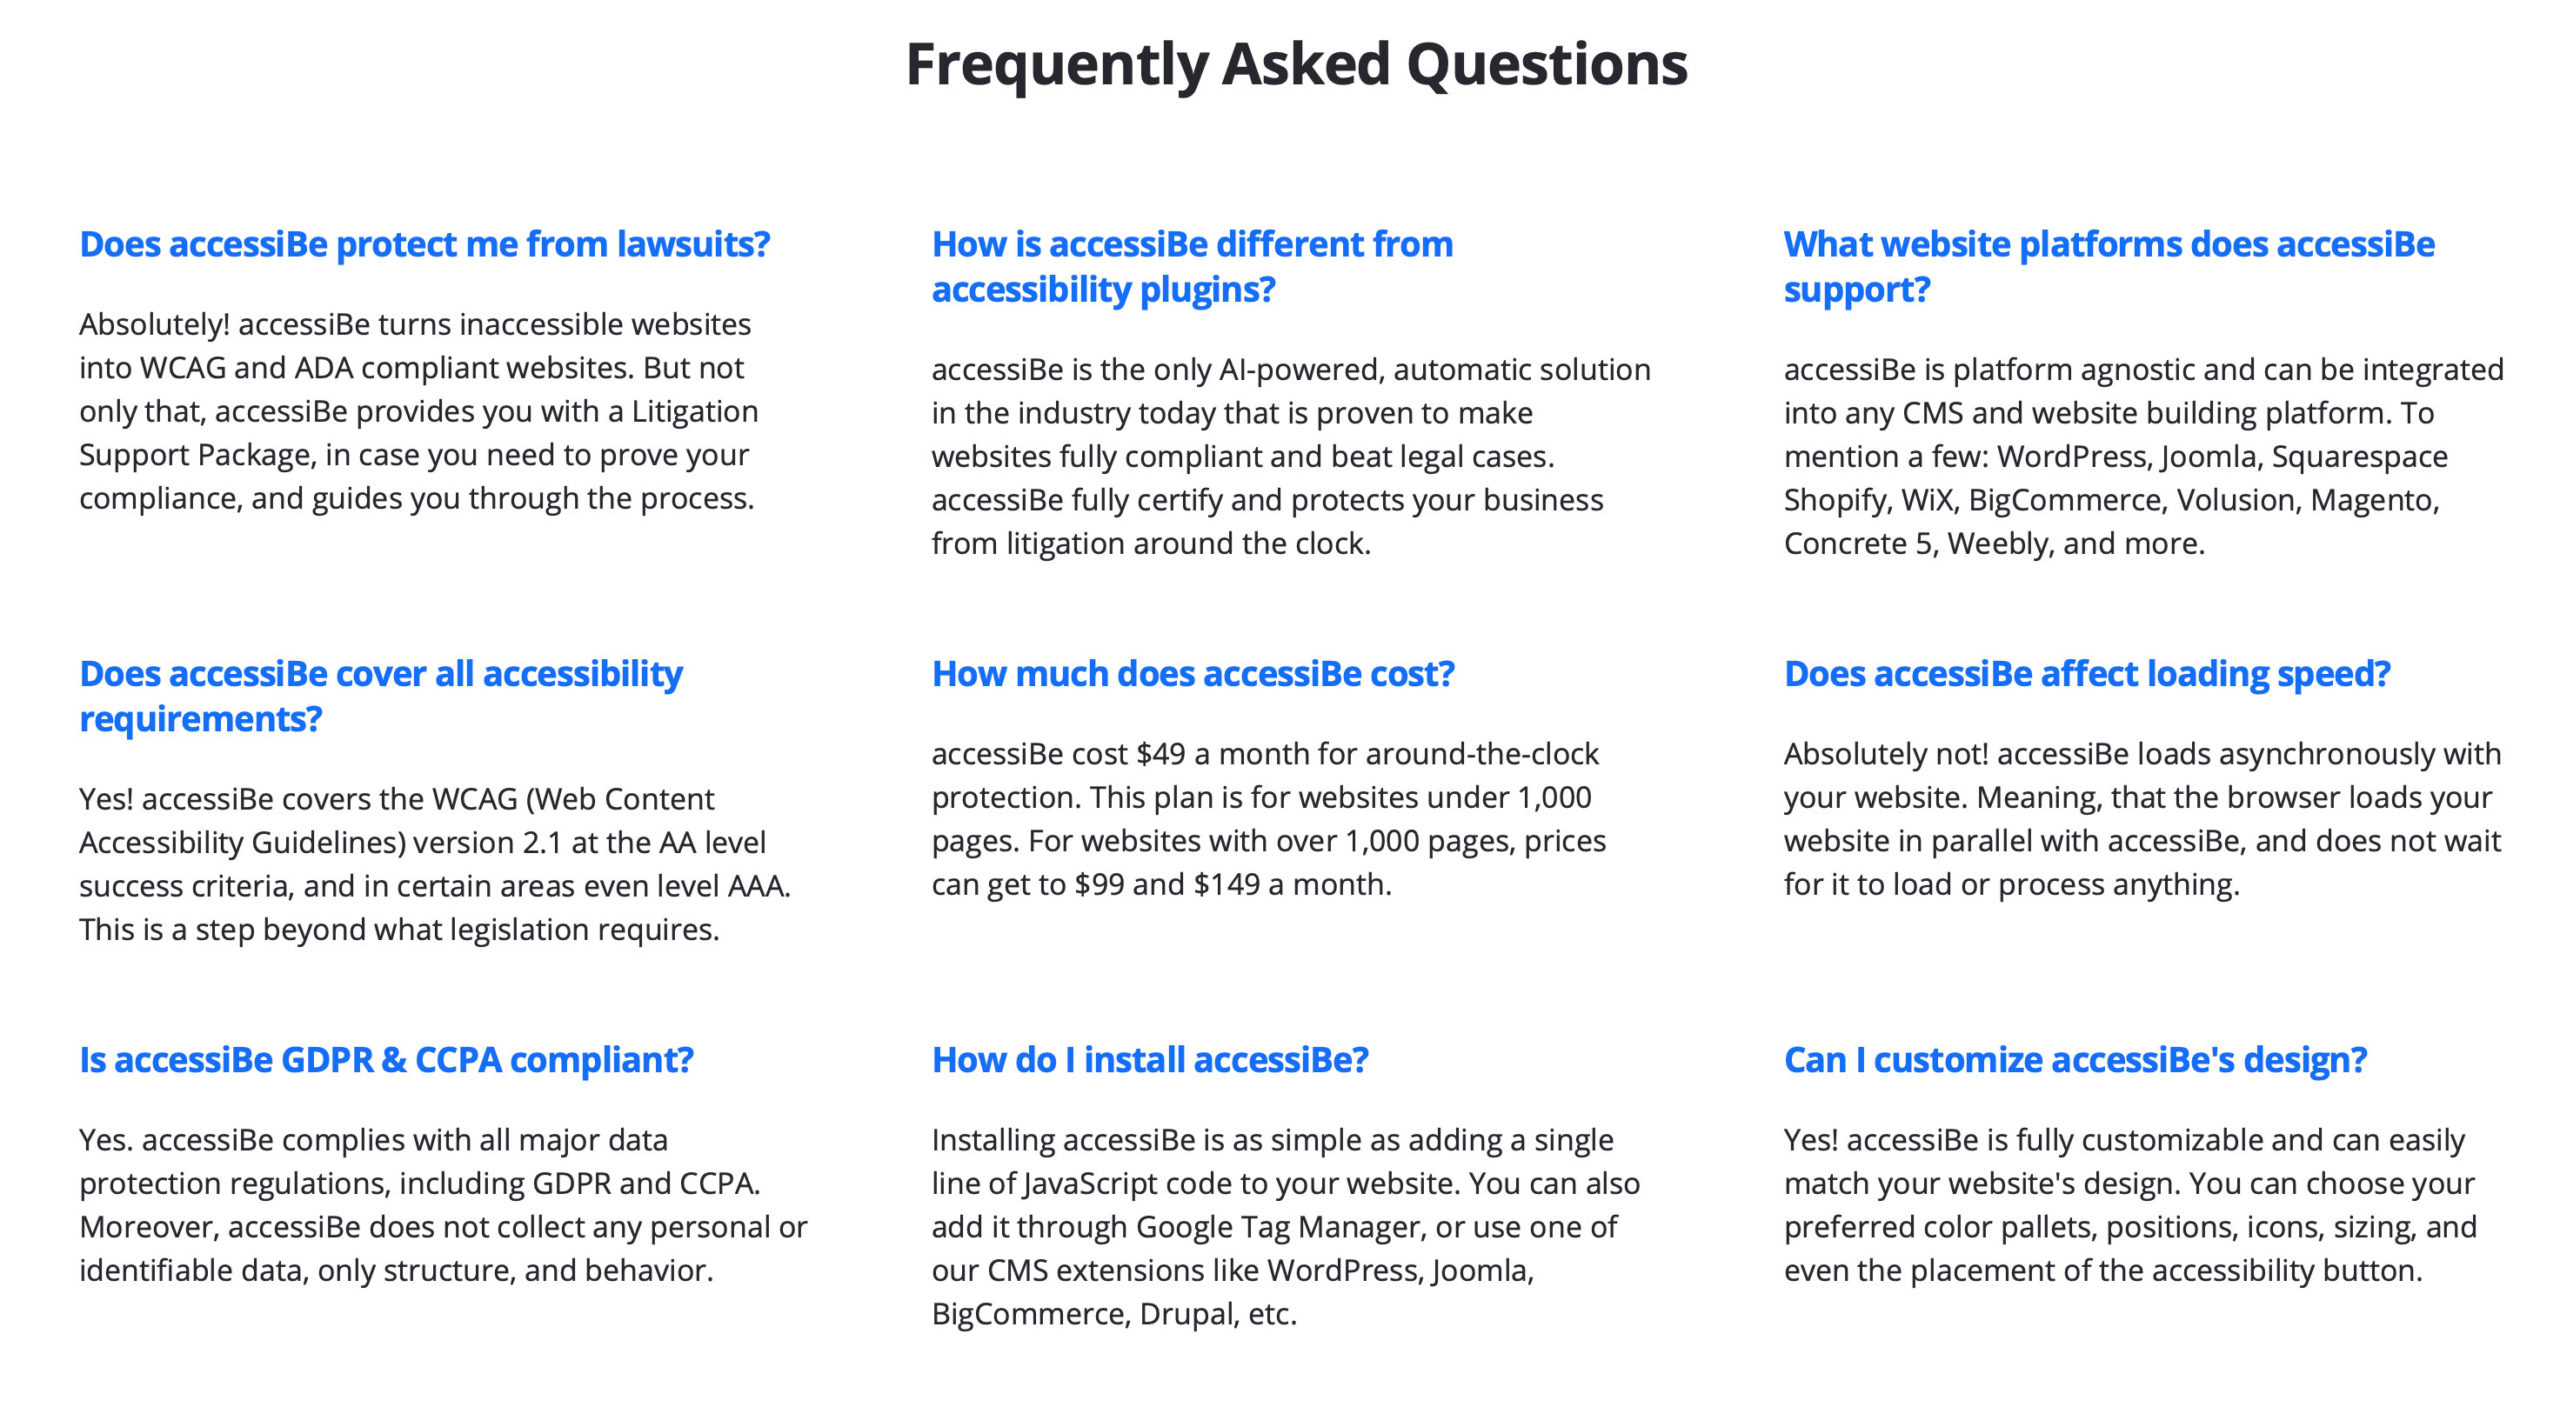 Image of accessiBe's Frequently Asked Questions about ADA Compliancy